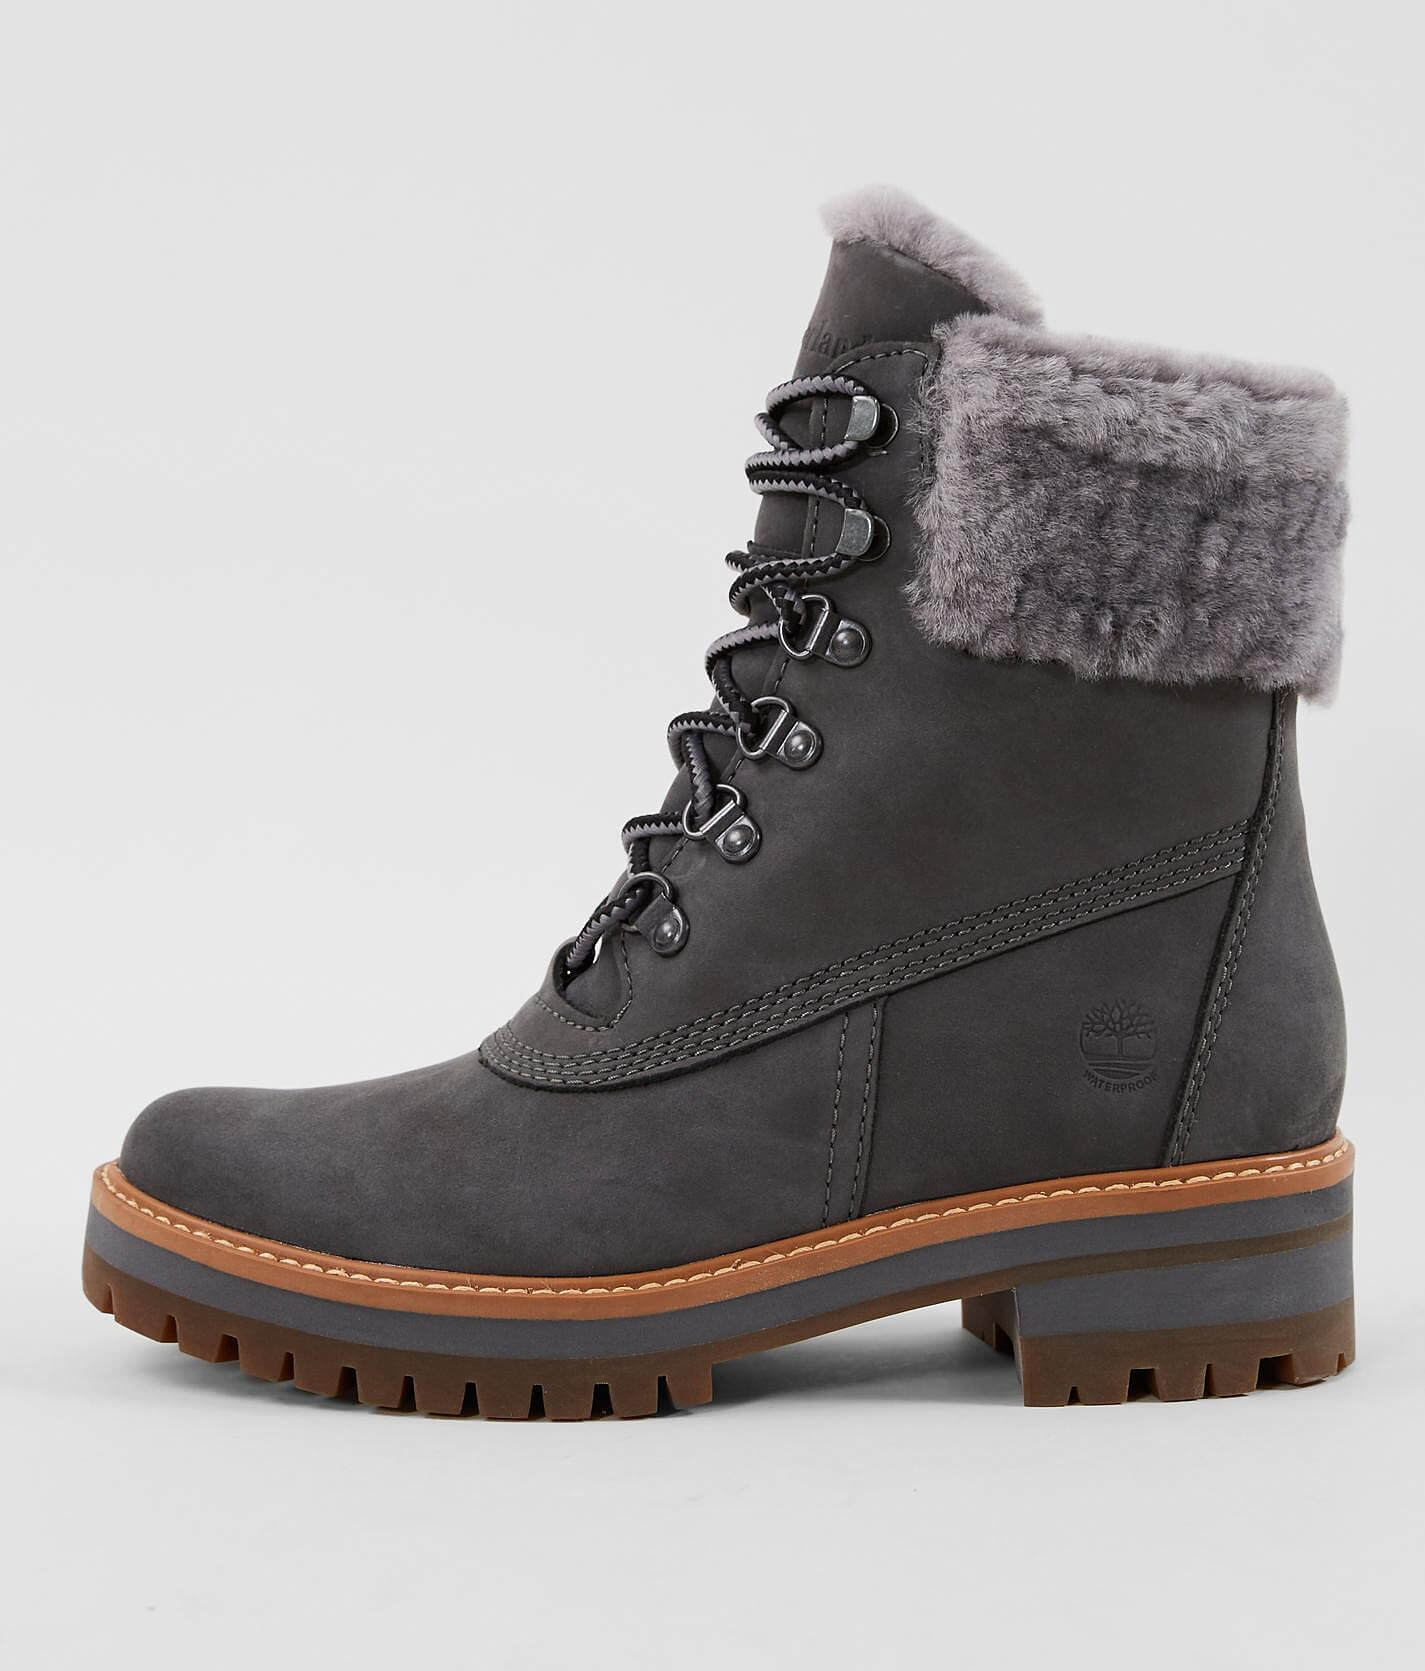 timberland boots with wool inside